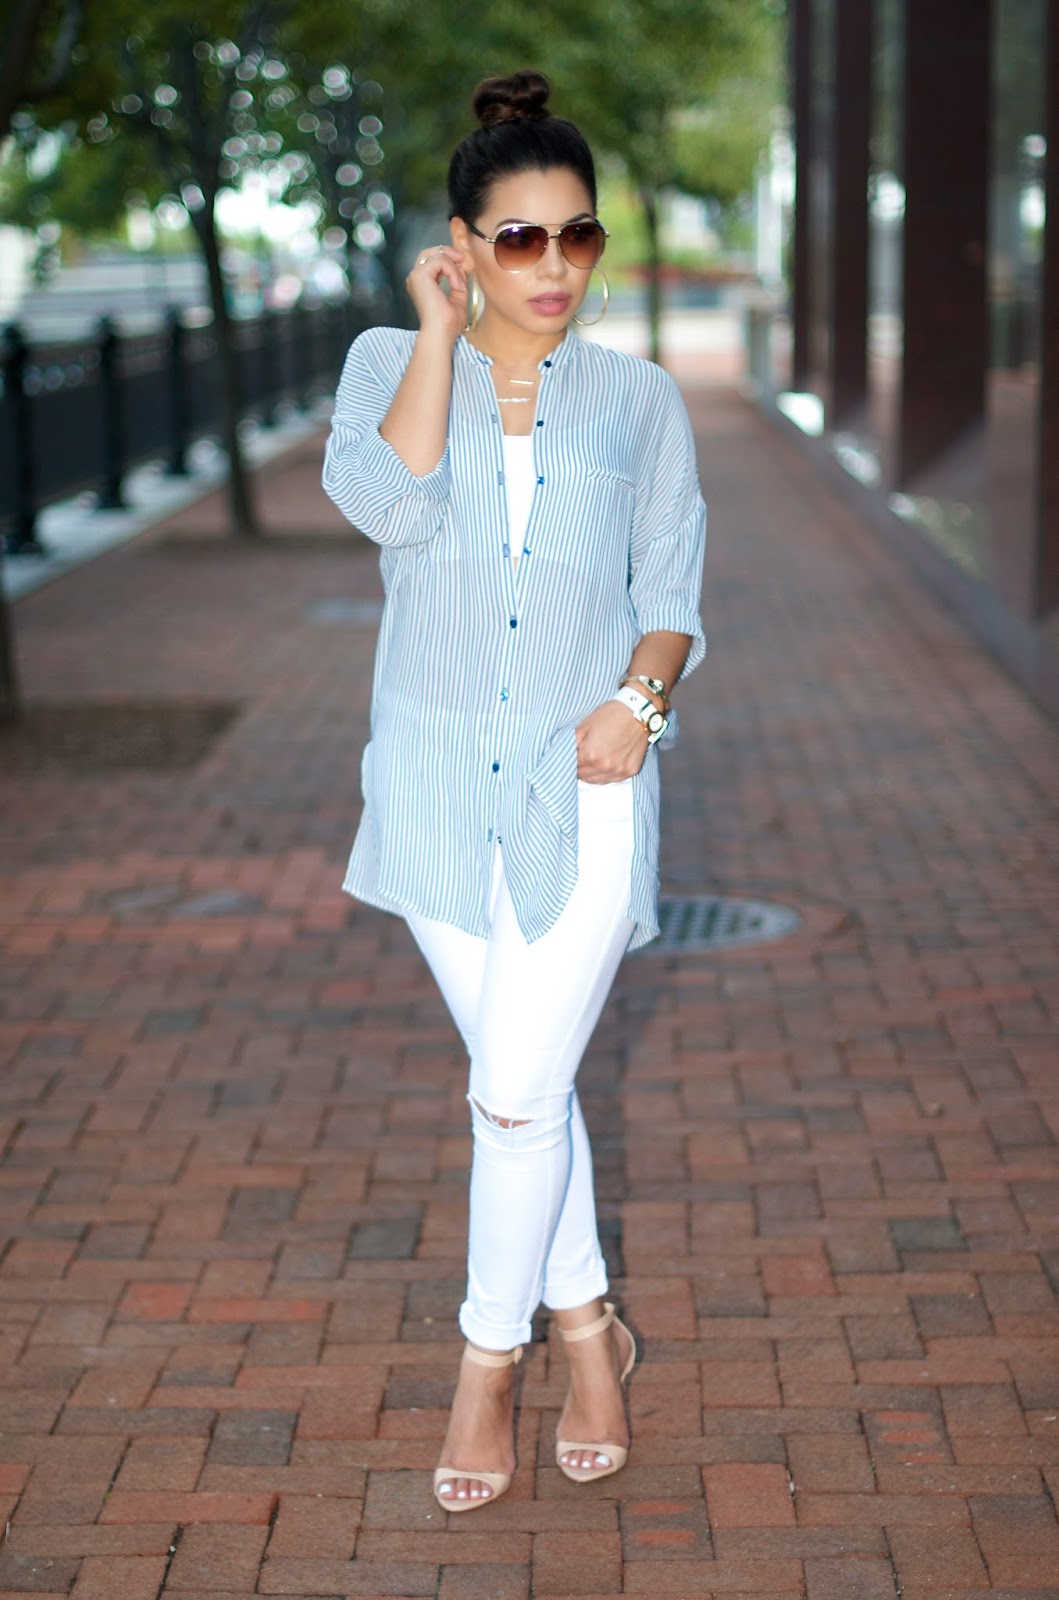 How to Style: Oversized Shirt + Distressed Jeans | The Style Brunch